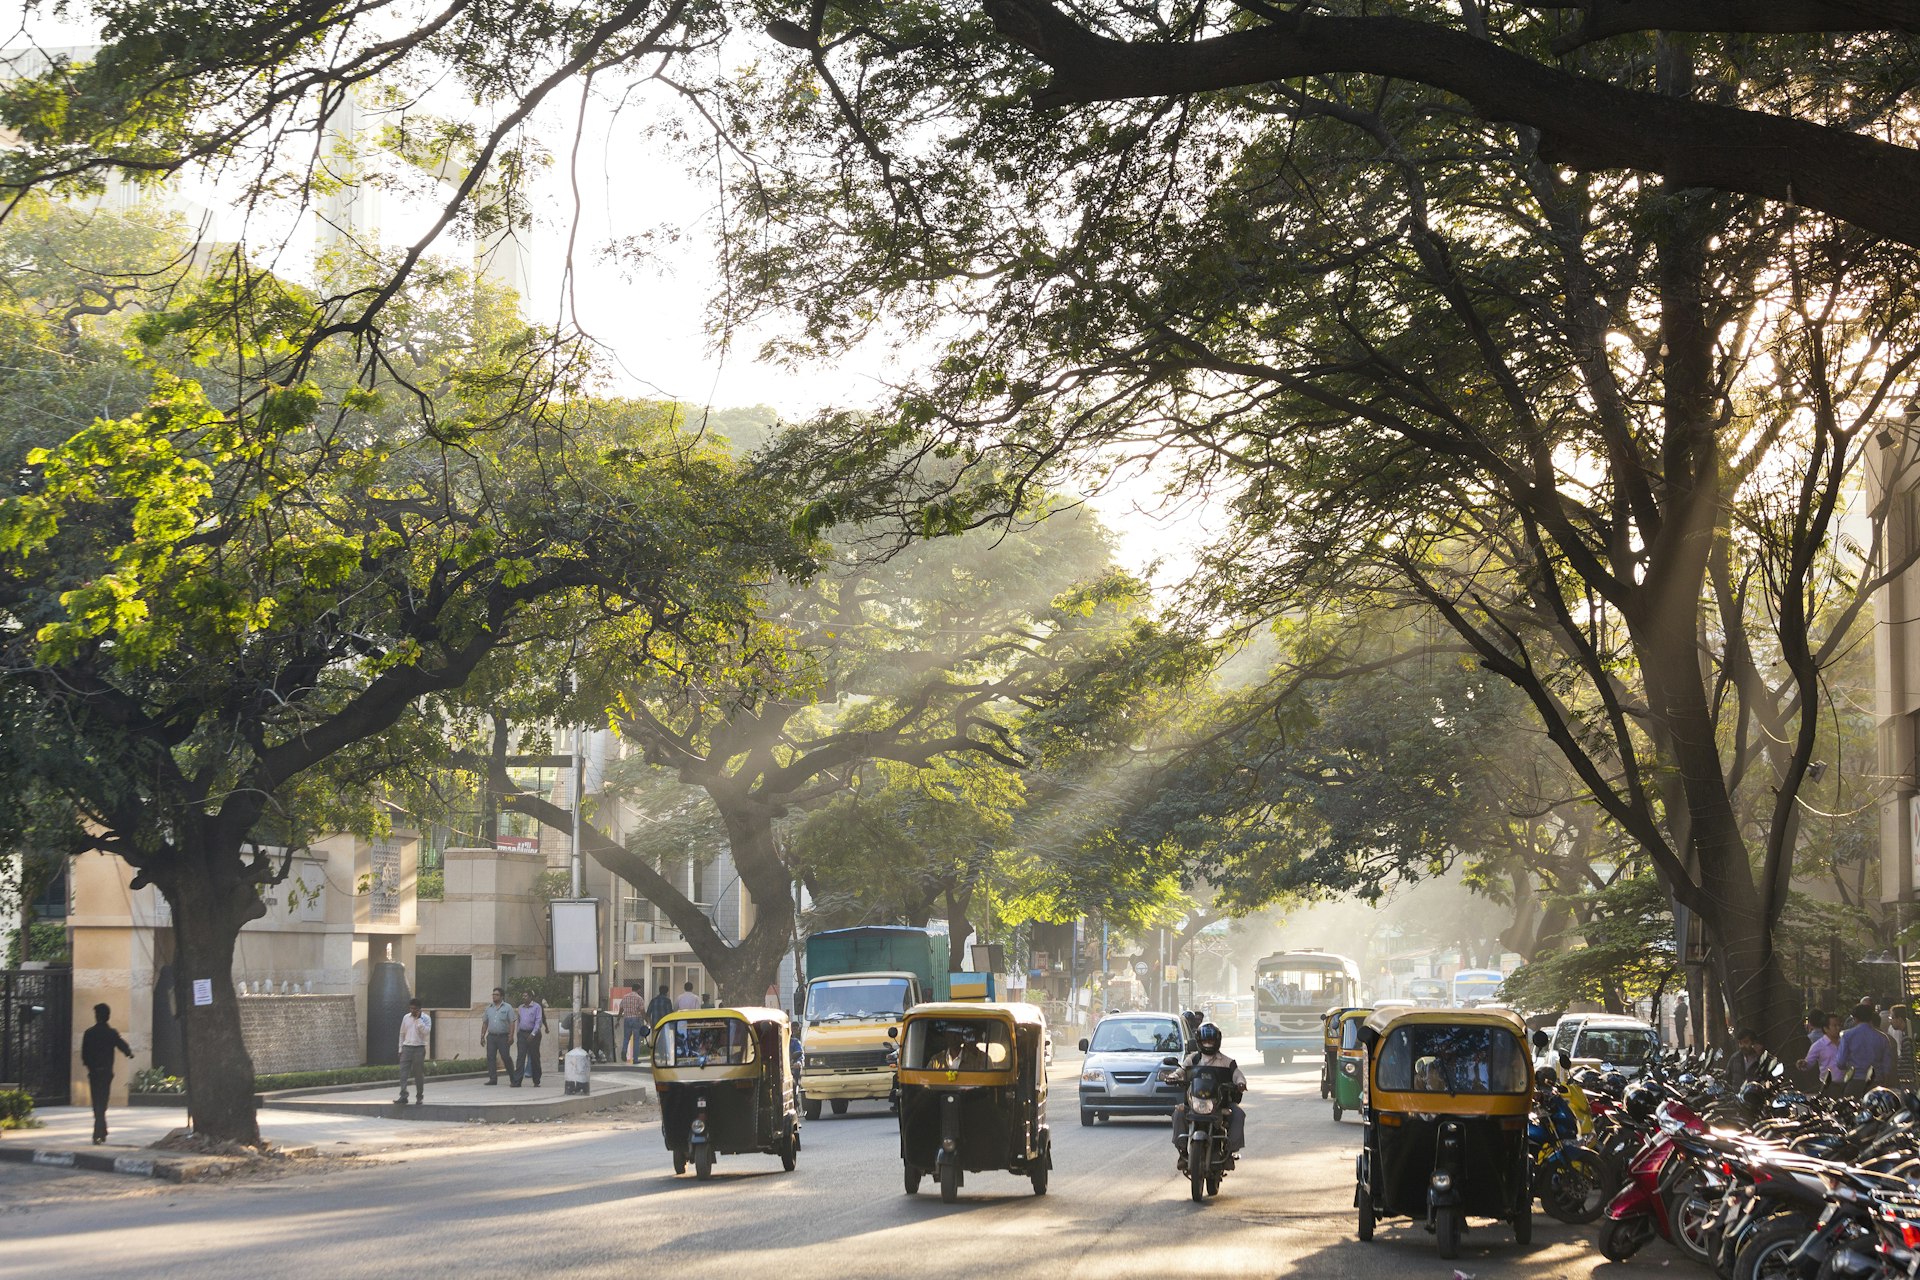 Yellow-and-black auto-rickshaws on a tree-lined street, Bangalore. Sunbeams are shining through the trees